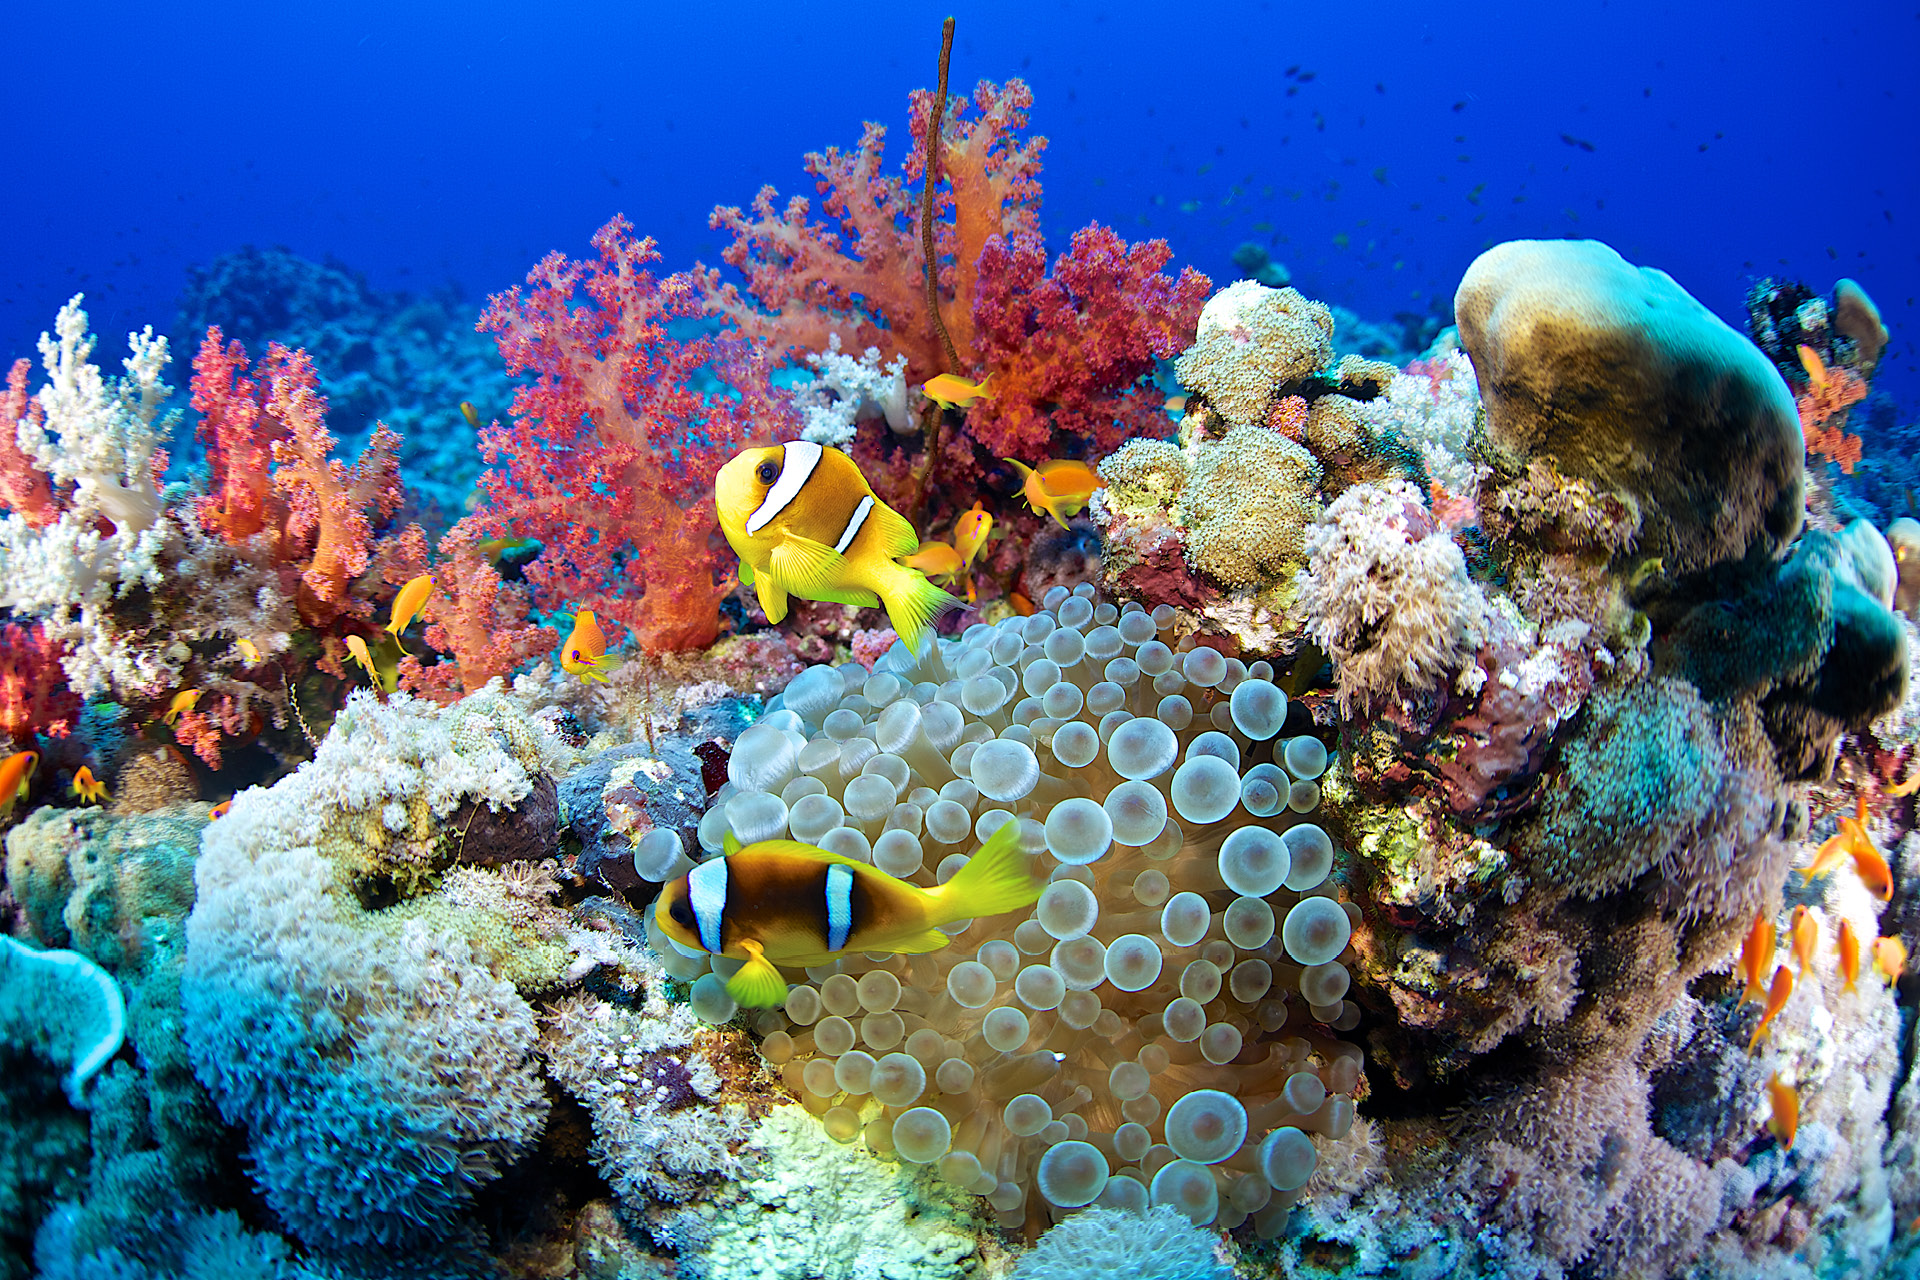 Satellite Images Discovered There Are More Coral Reef Areas Than We Thought